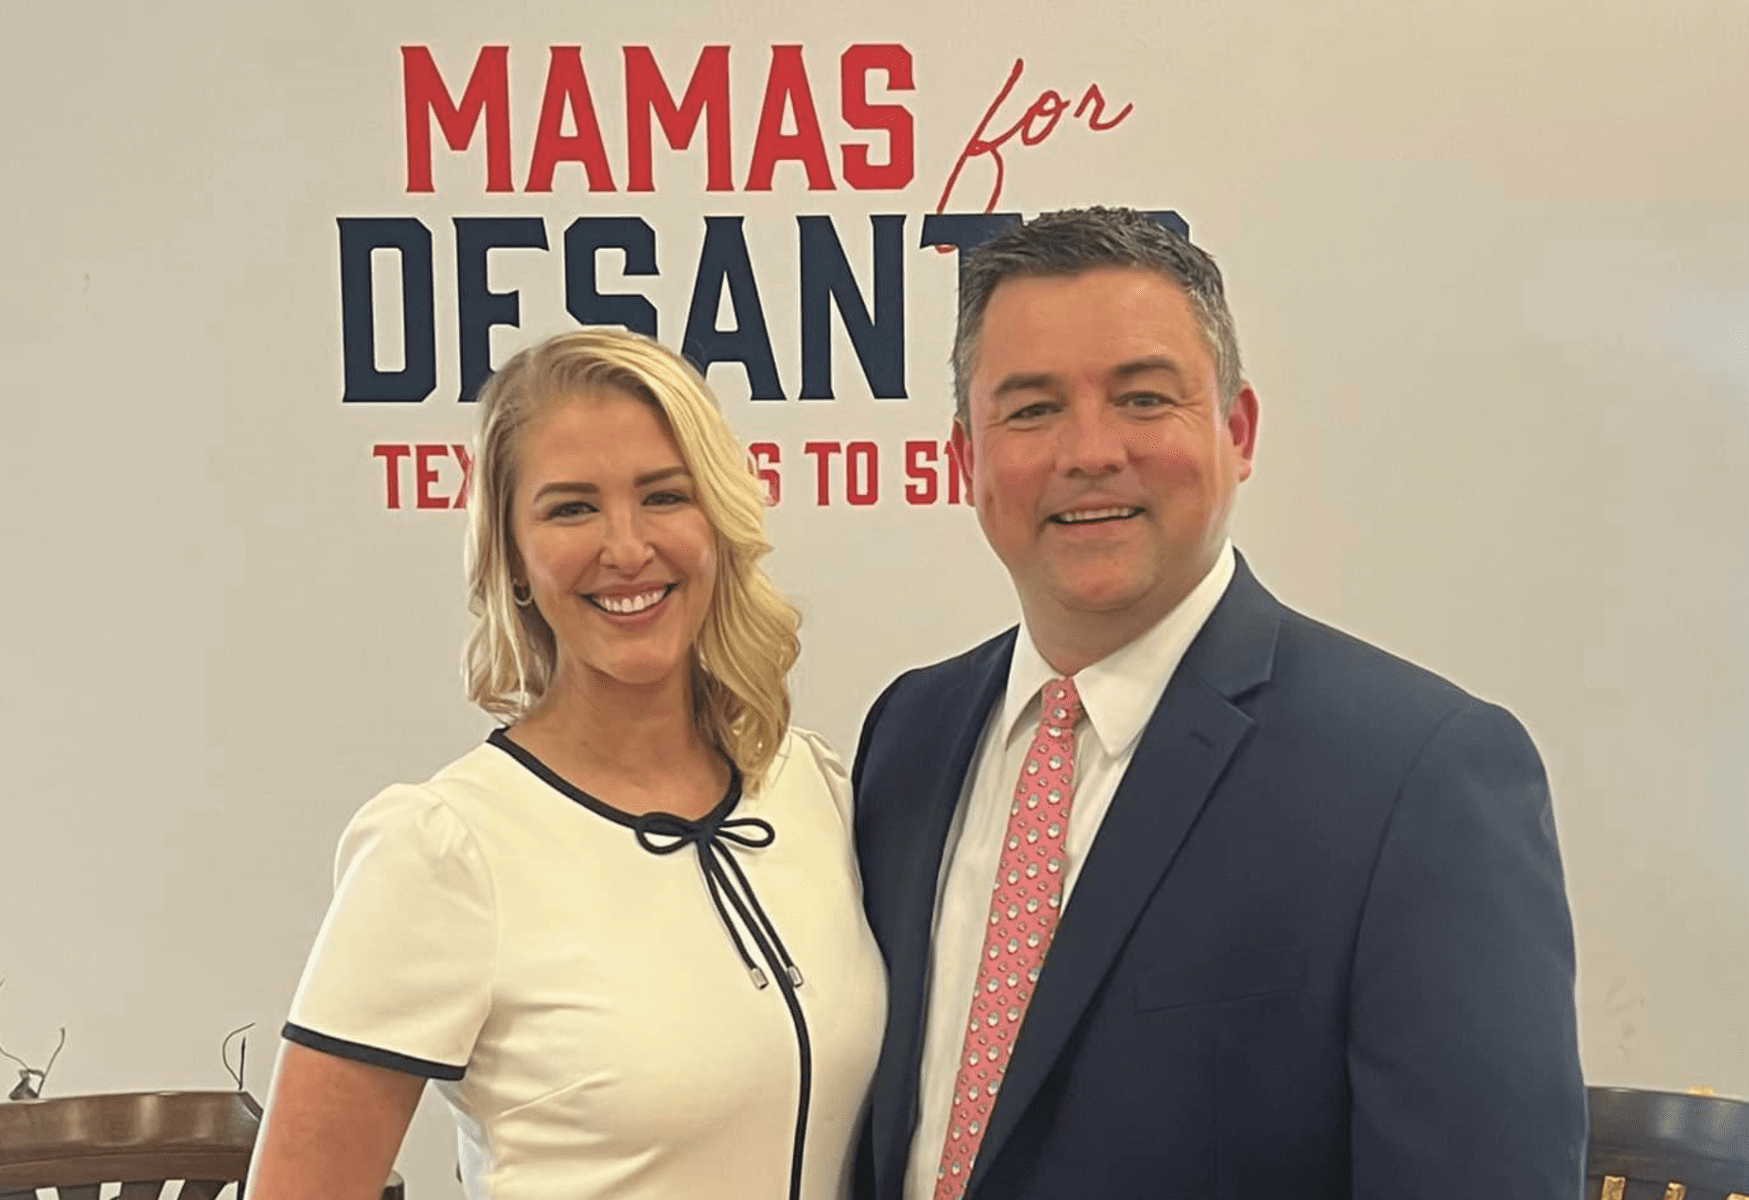 A blond woman thrusting out her chest is wearing a white short with blue trim. She stands next to a white man in a suit with a red tie. The sign behind them reads Mamas for DeSantis.